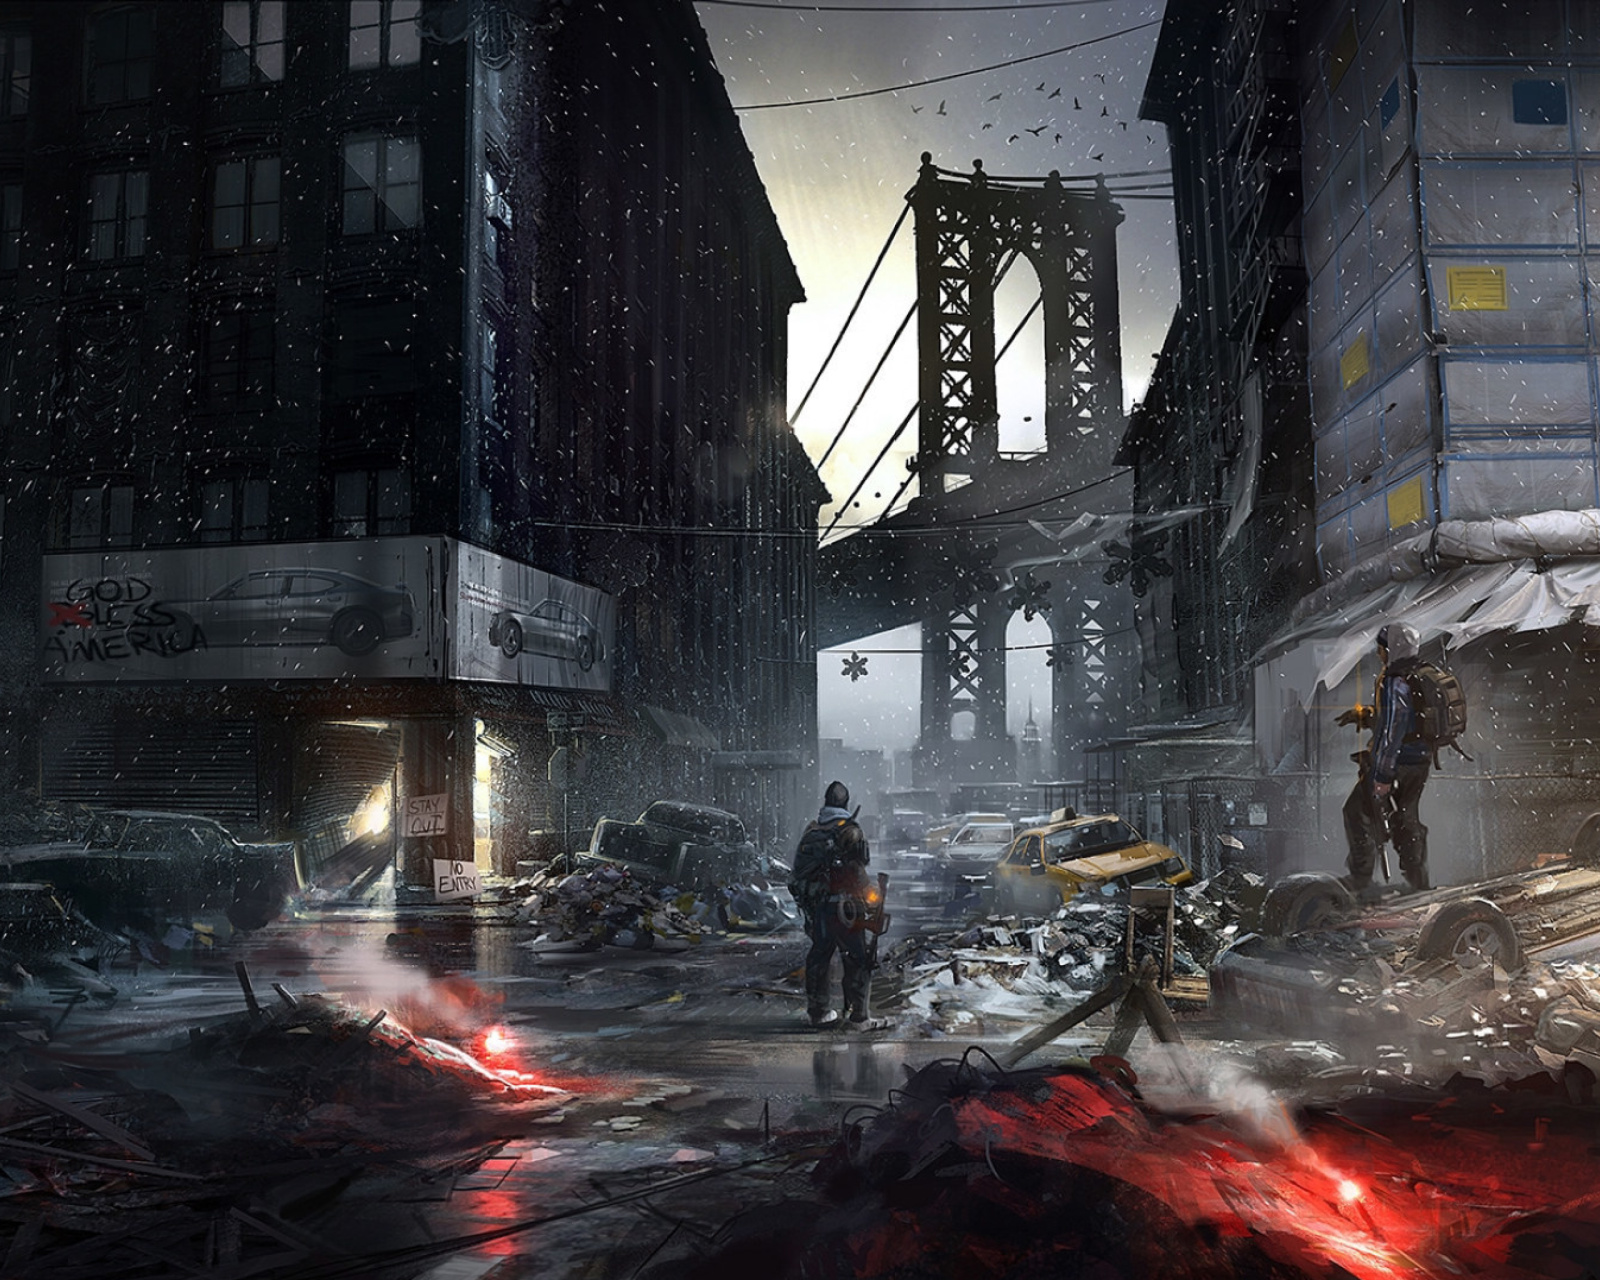 Das Tom Clancy's The Division Wallpaper 1600x1280